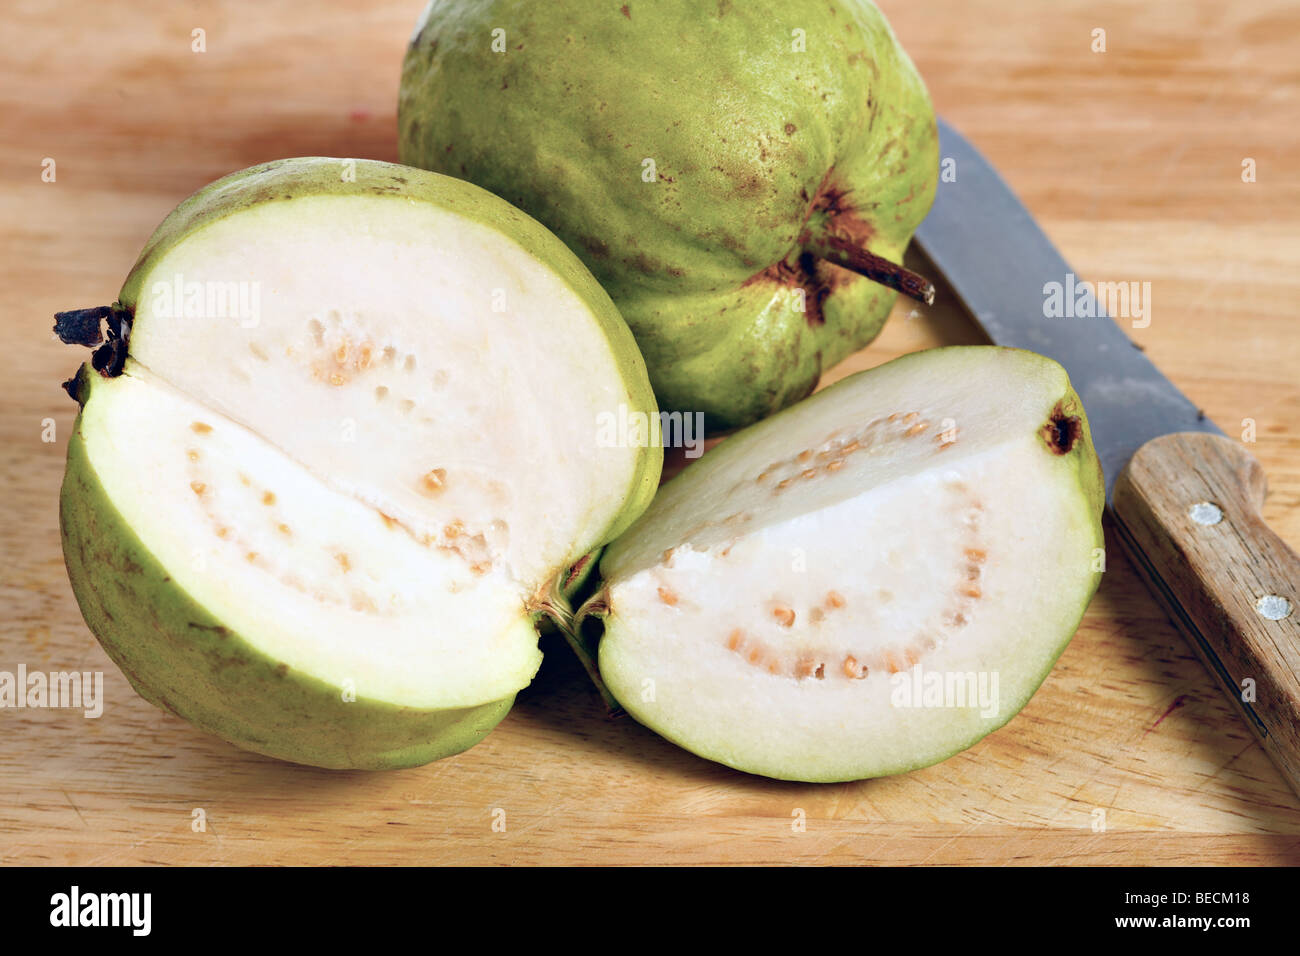 A guava fruit, of the common apple guava (Psidium guajava) variety, cut open to show the flesh and pips inside Stock Photo